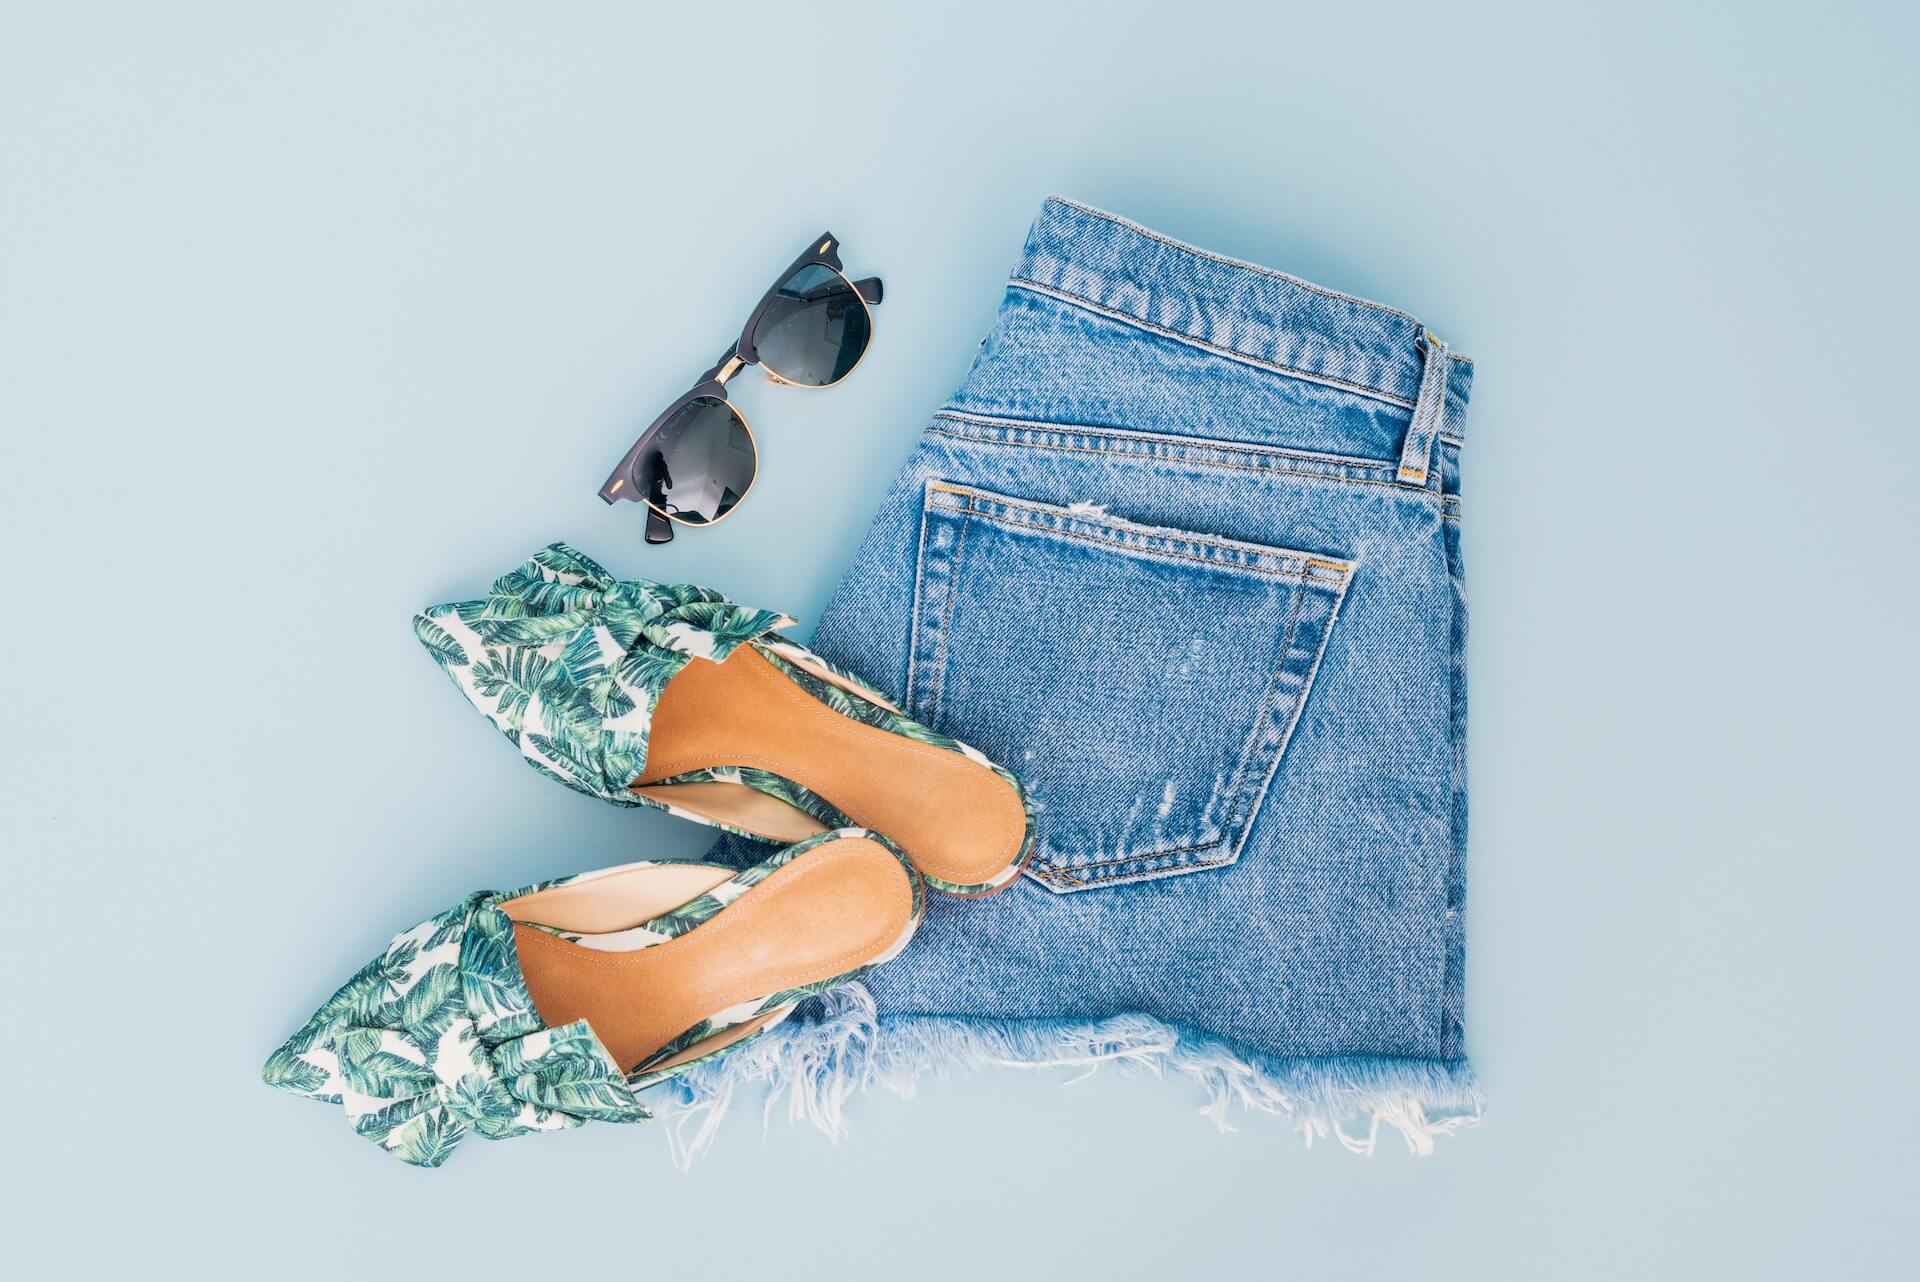 Denim shorts, sunglasses, and sandals on a white surface